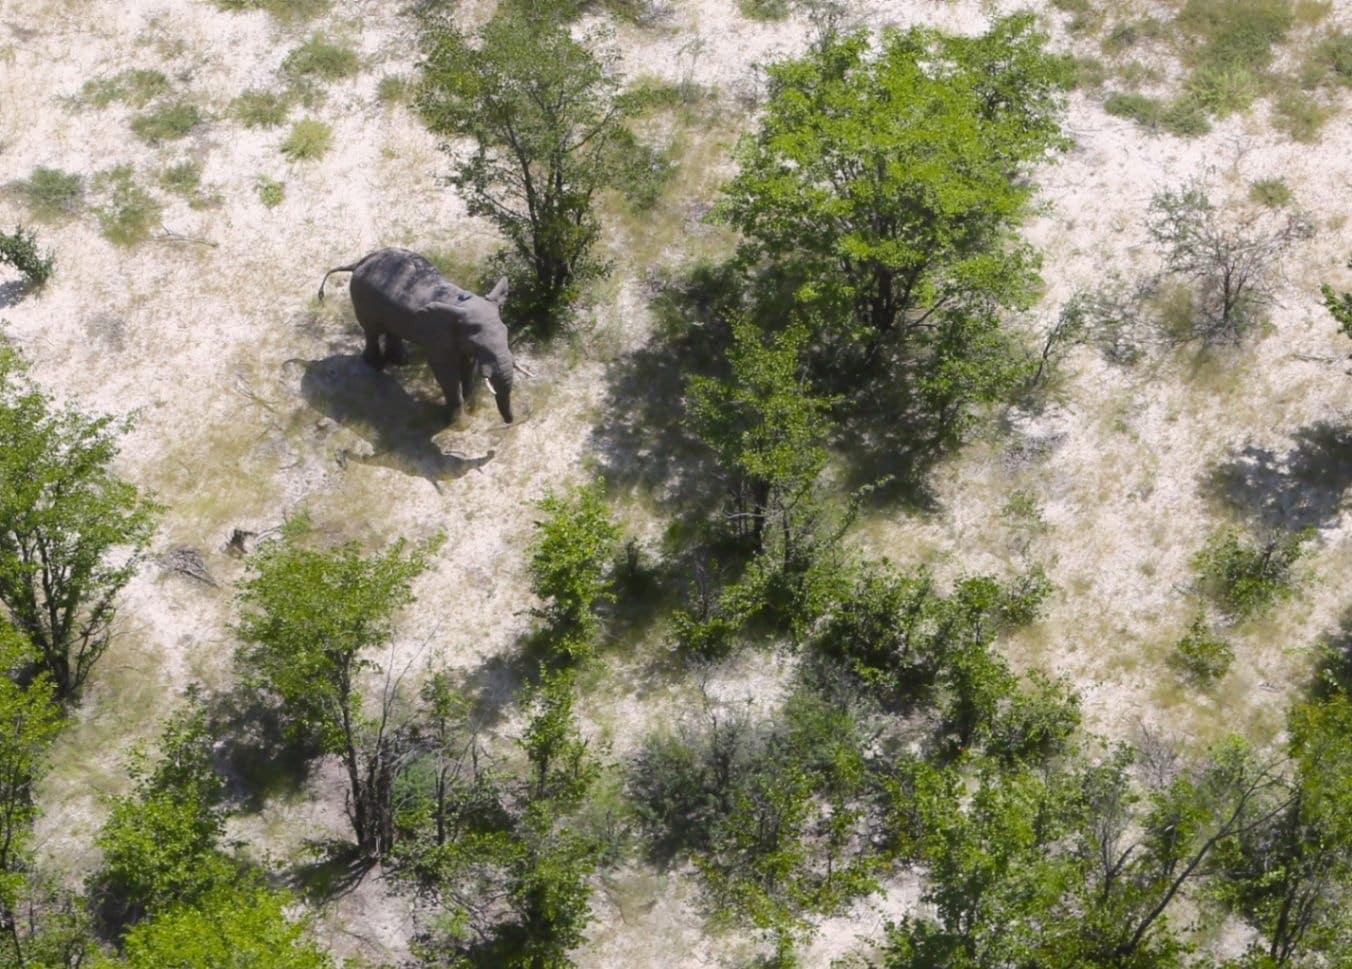 Aerial view of an elephant in a grassy area with some small trees.